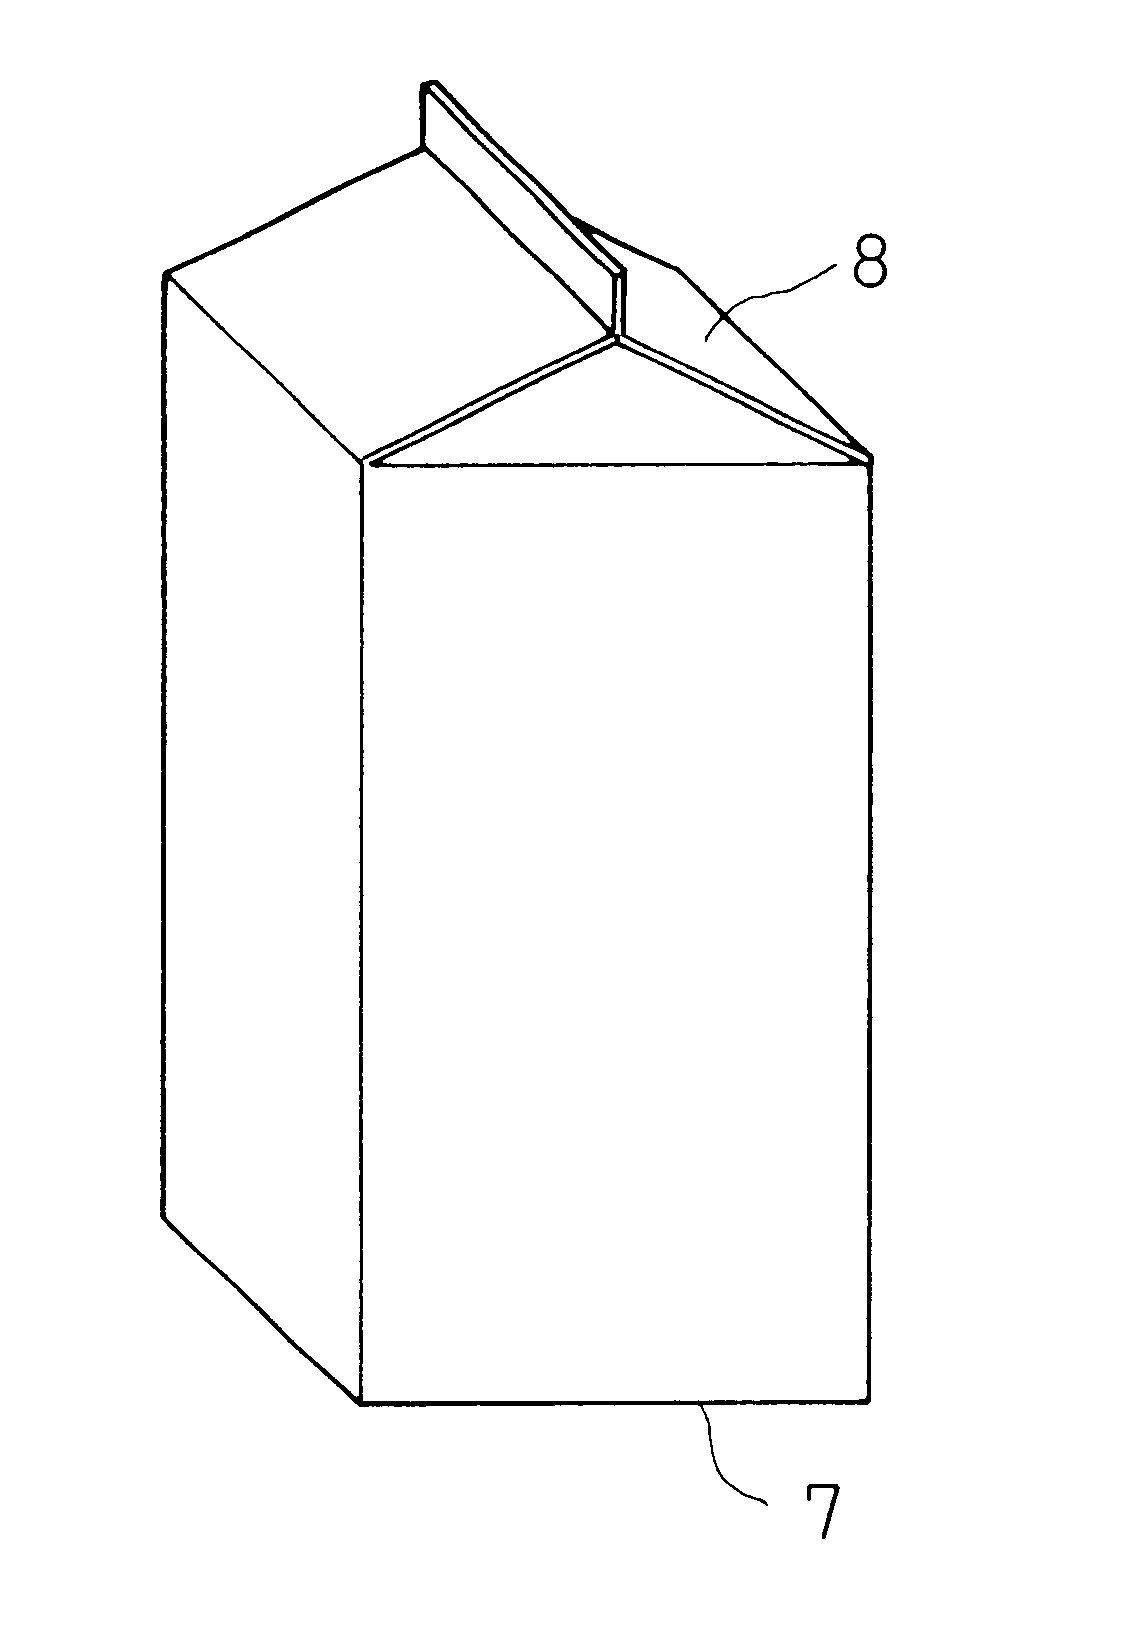 Laminate with gas barrier properties, production method therefor, and paper container employing said laminate